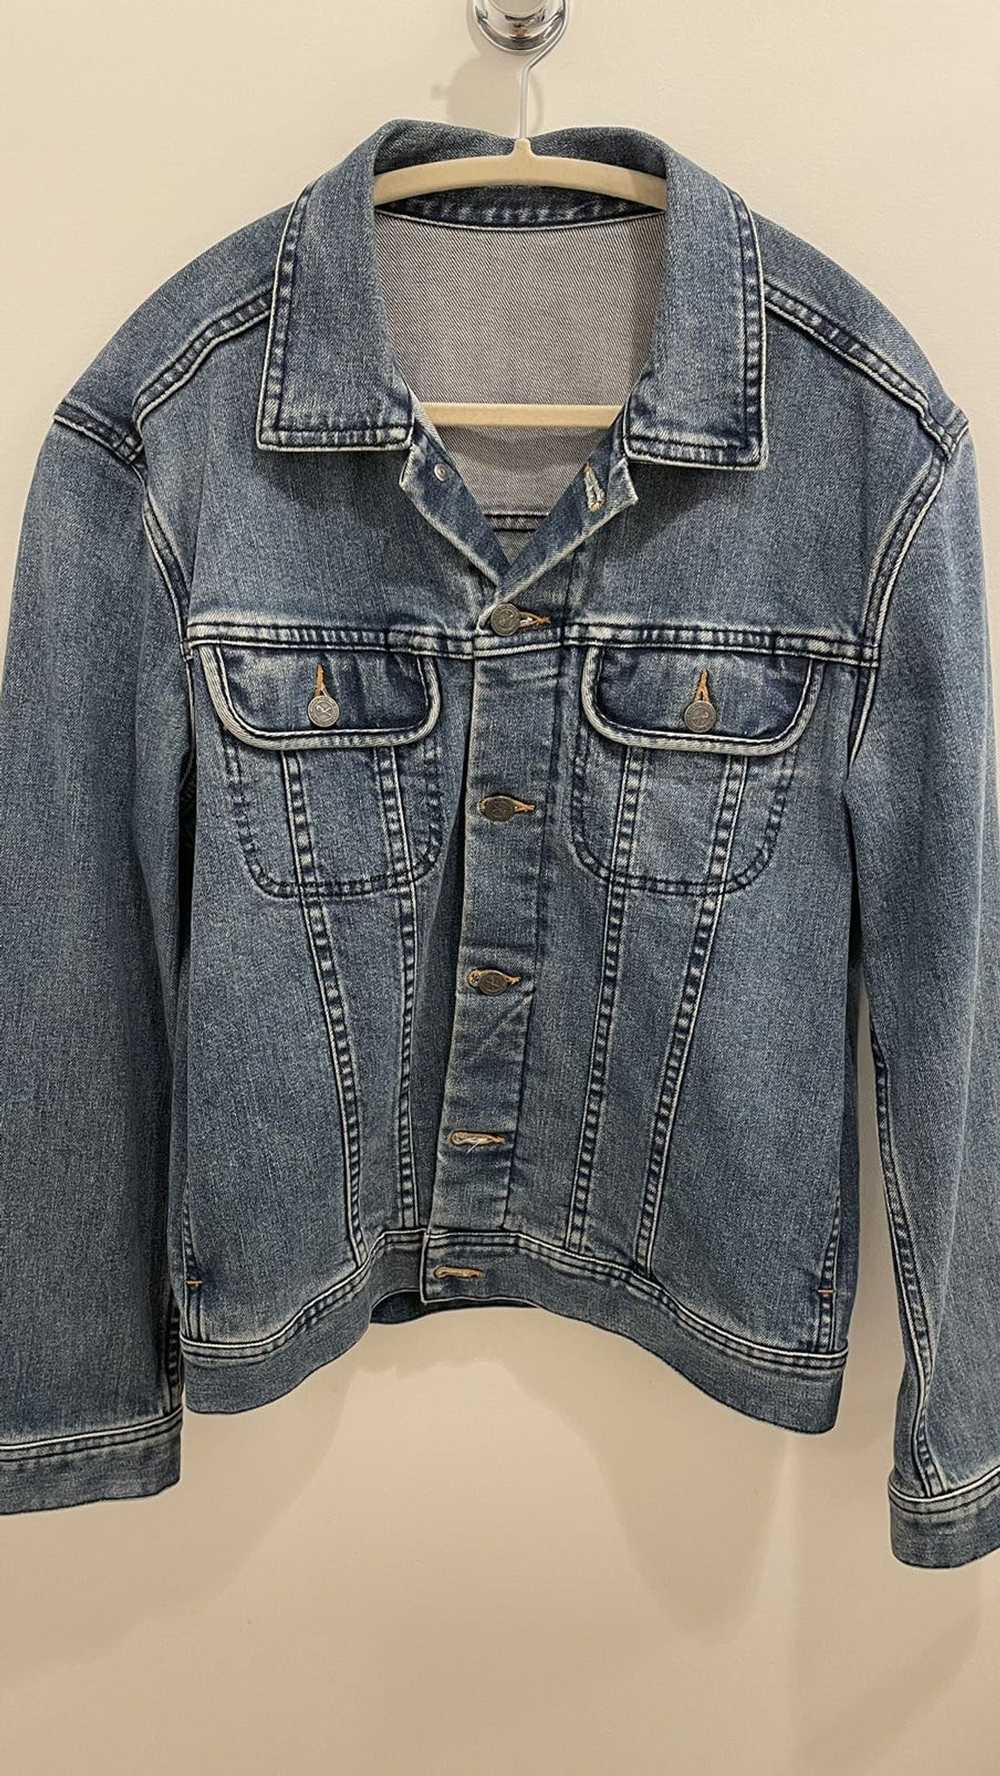 A.P.C. A.P.C. Fitted Denim Jacket - image 1